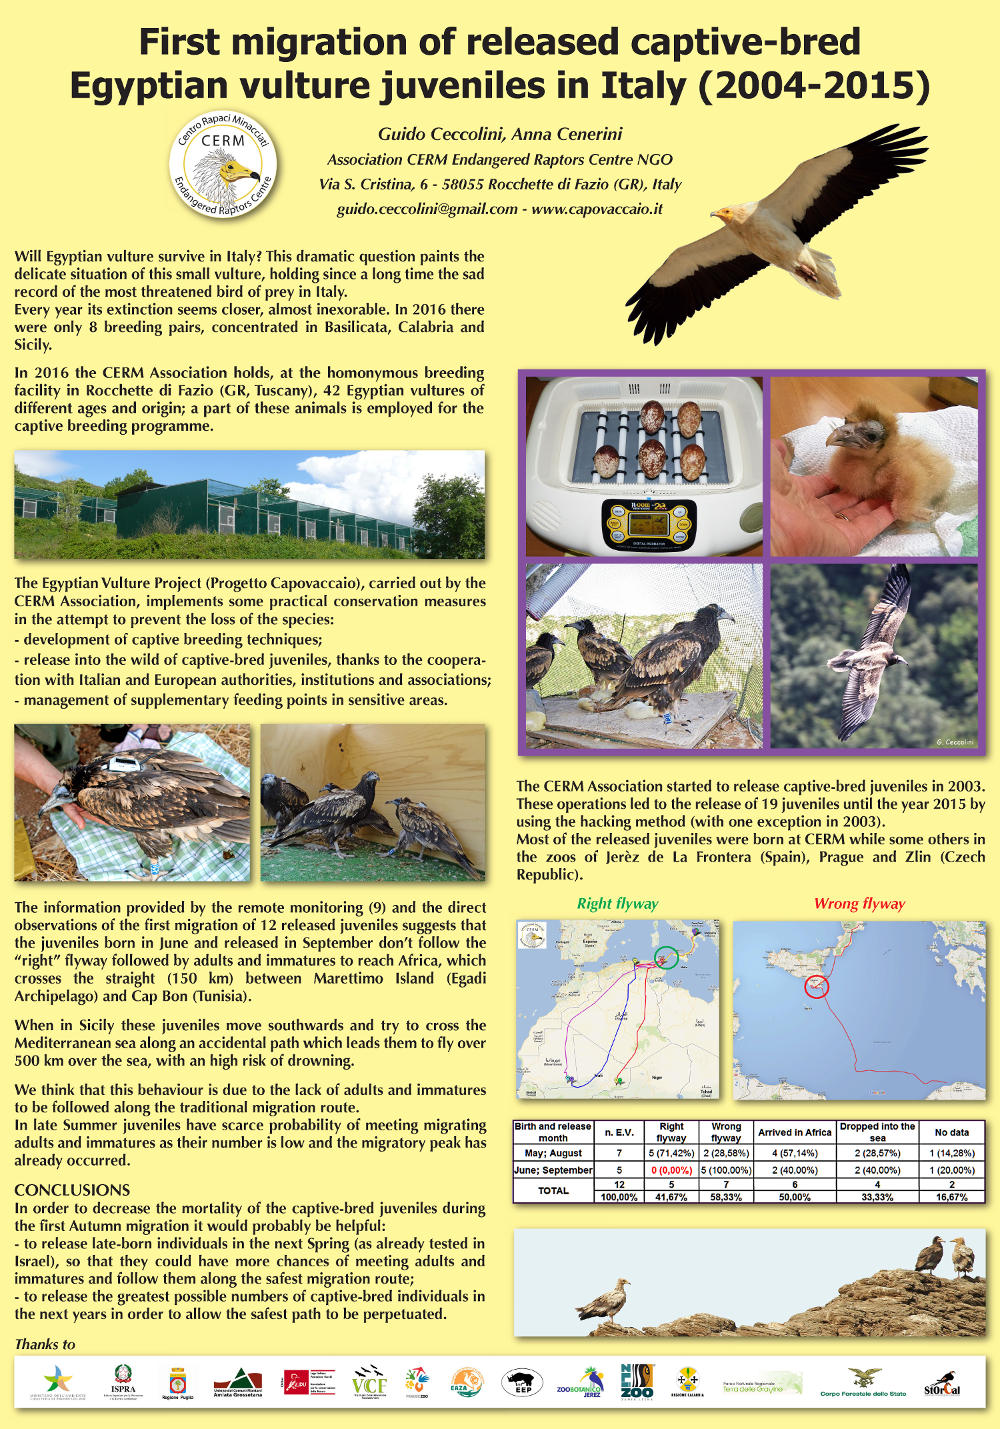 Poster “First migration of released captive-bred Egyptian vulture juveniles in Italy (2004-2015)”.